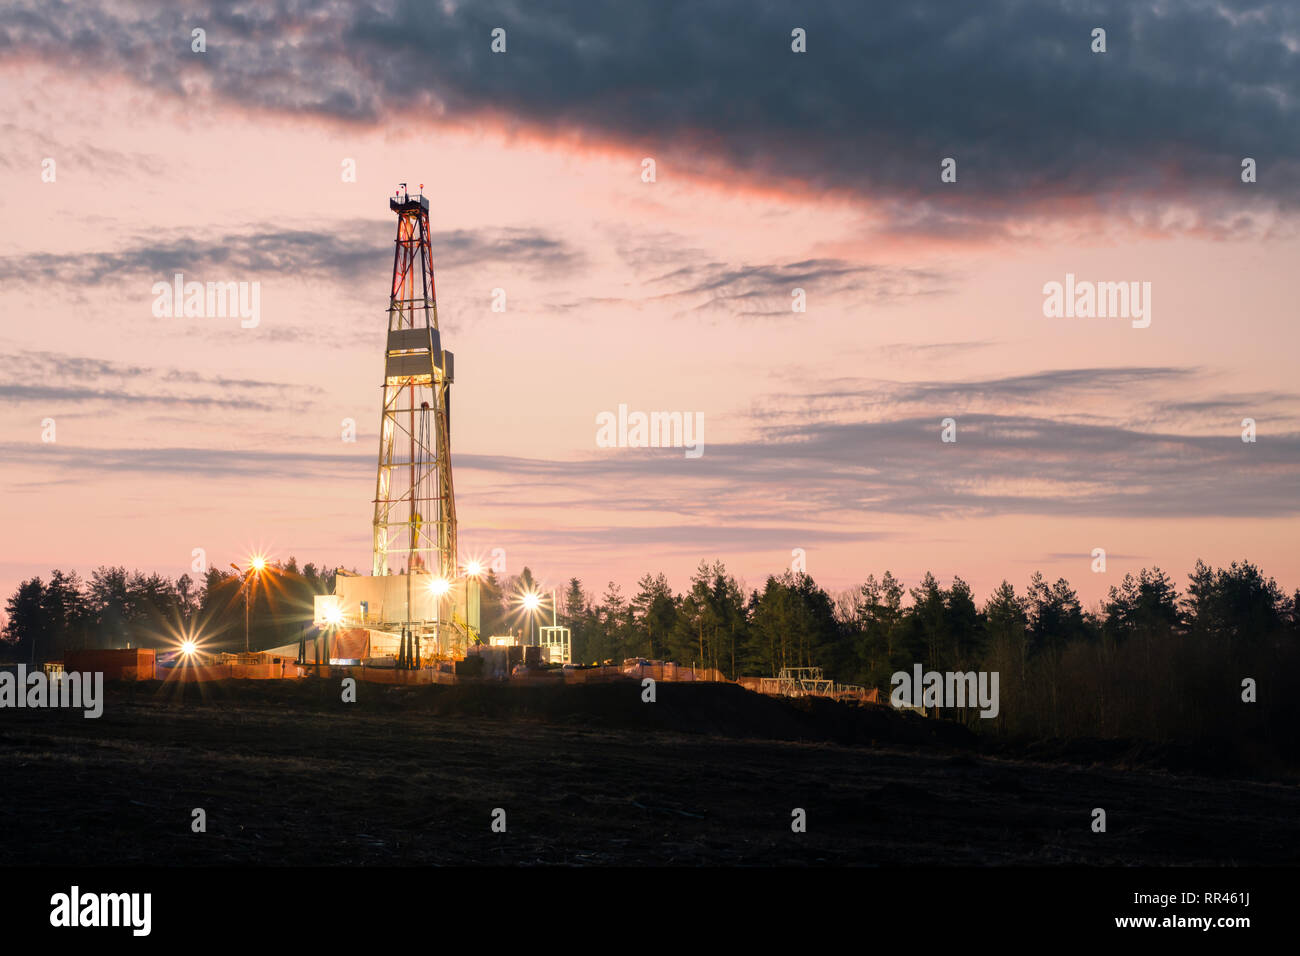 Oil gas drilling rig on sunset background. Industrial concept Stock Photo